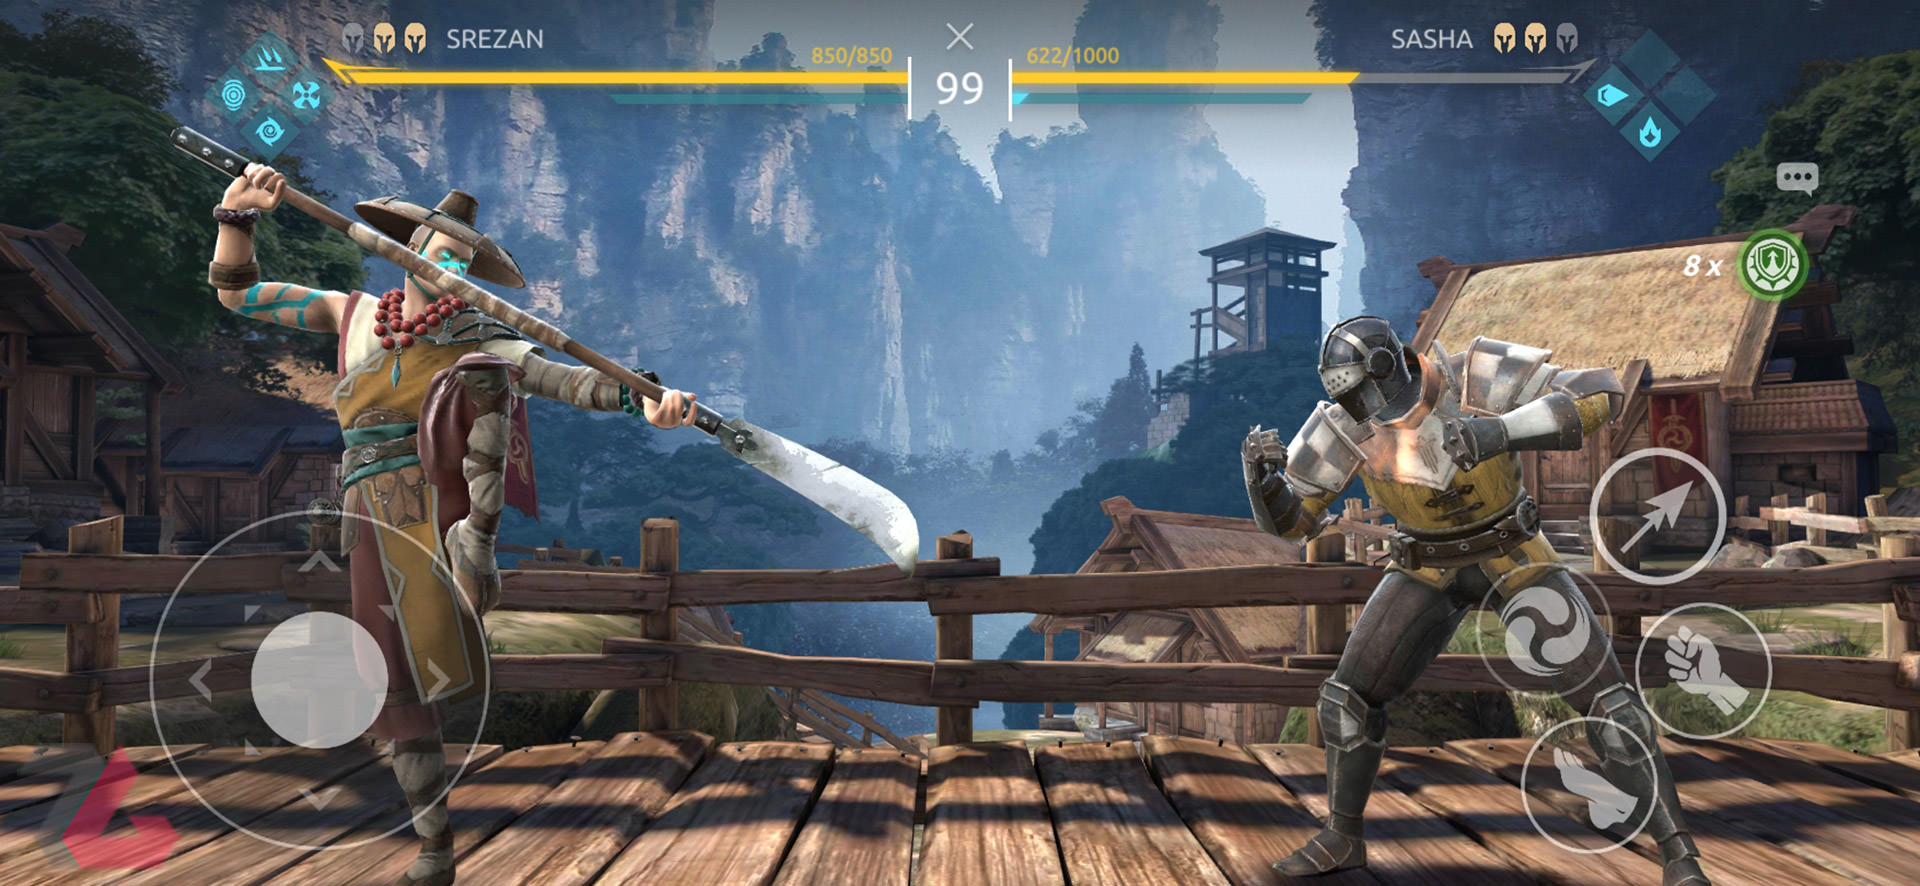 download free shadow fight 4 arena download